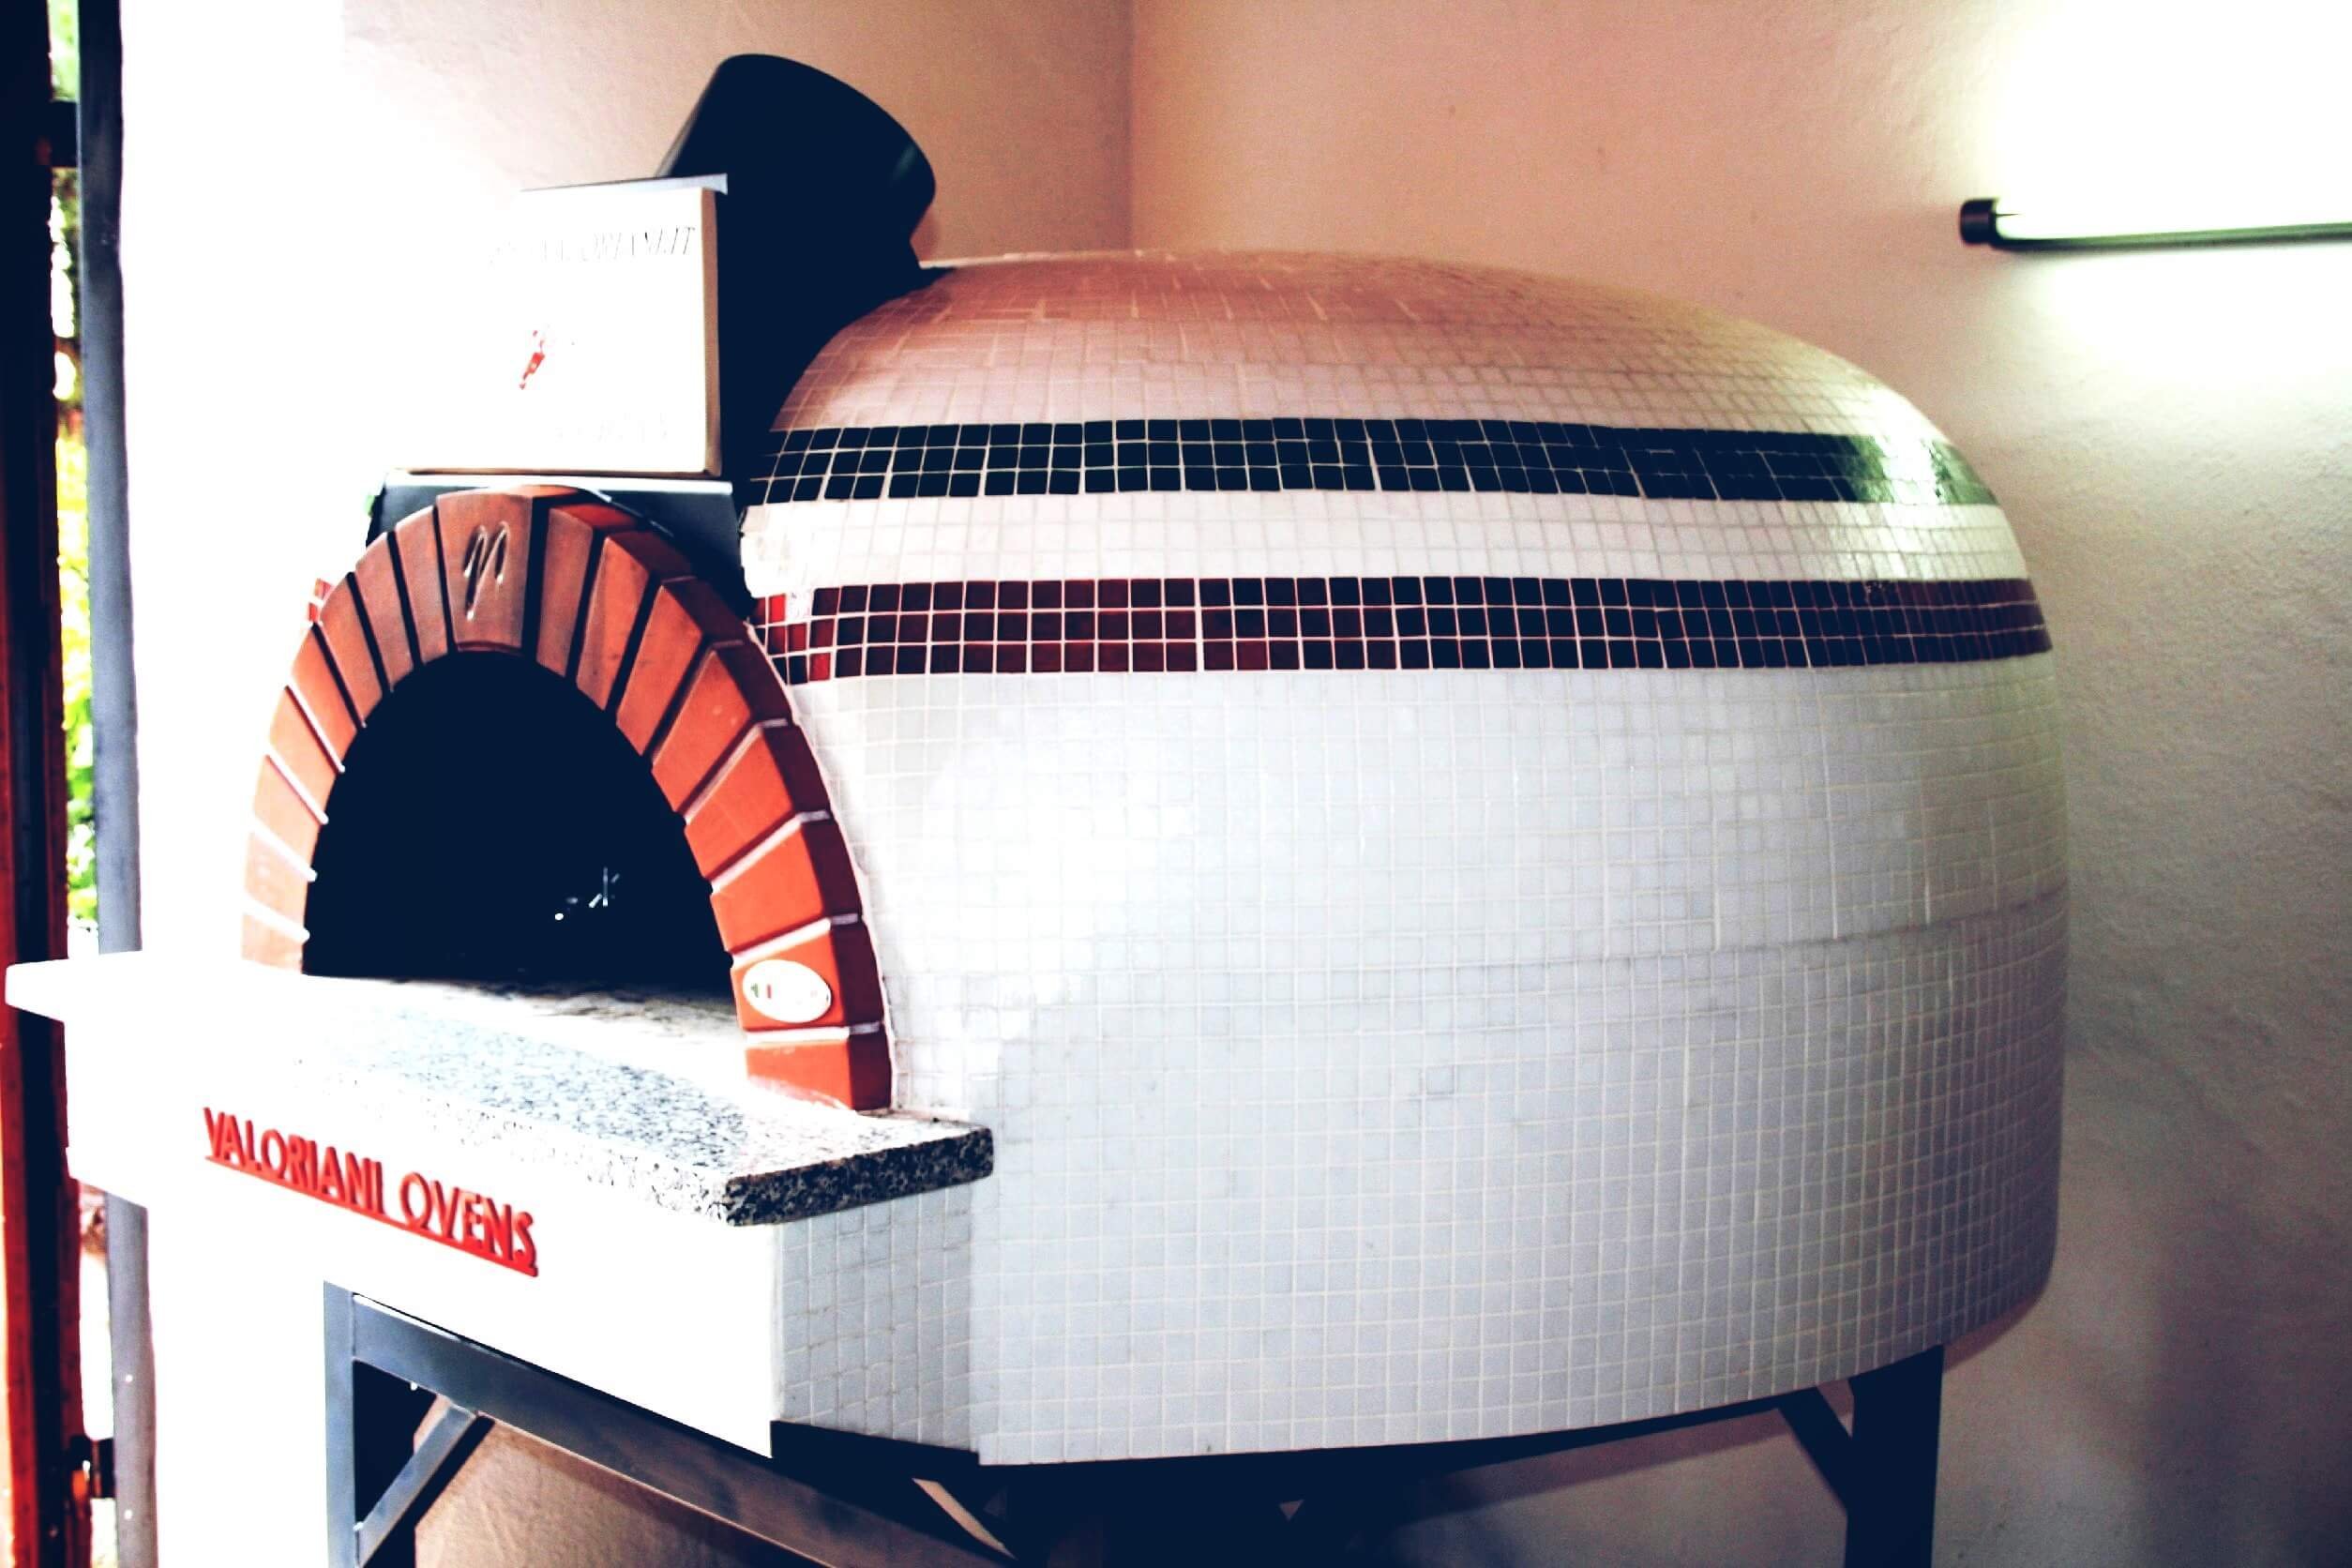 Professional pizza and baking oven, wood firing for continuous firing, Valoriani Vesuvio GR, 120cm